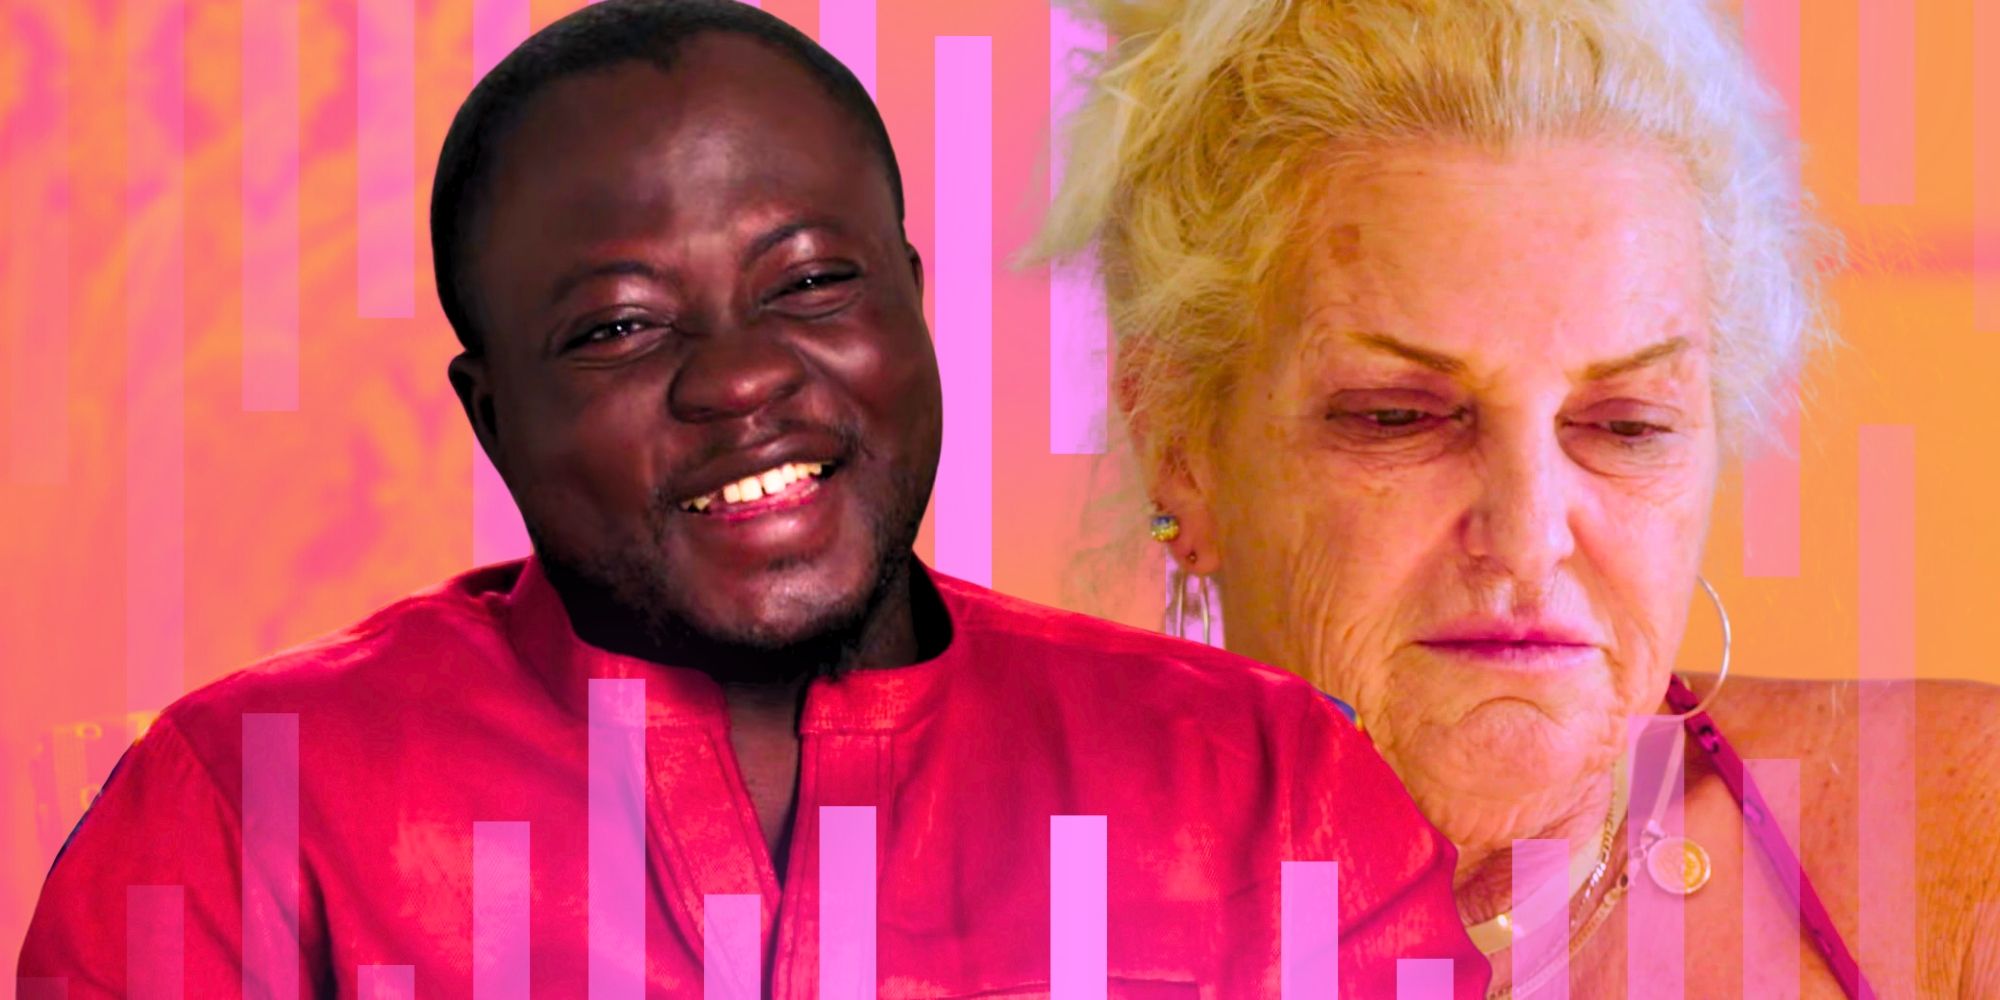 90 Day Fiancé Michael Ilesanmi in red shirt laughing with Angela Deem looking old and messy behing him